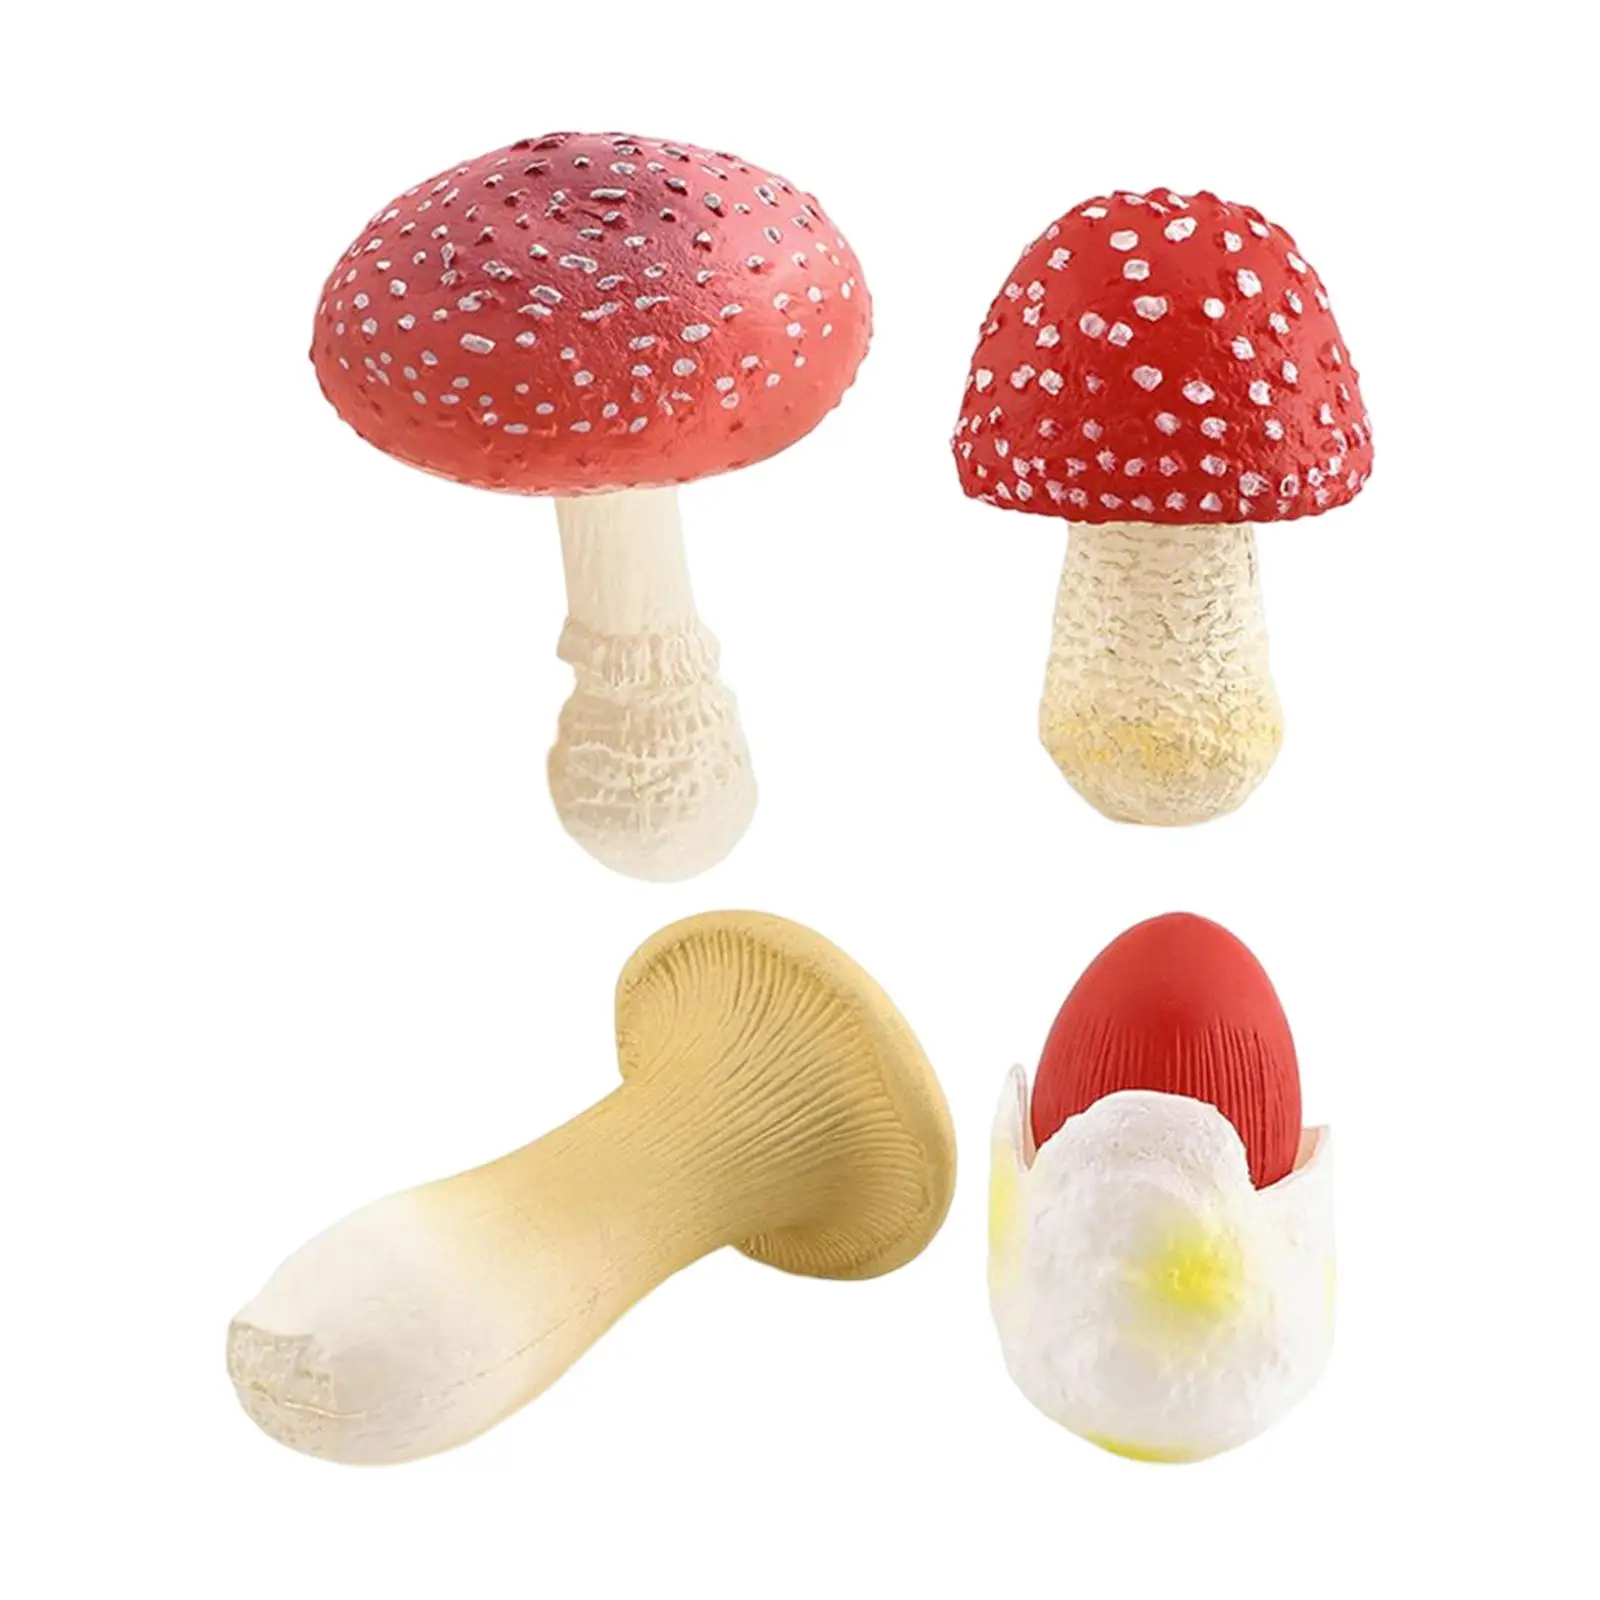 4 Pieces Mushroom Model Props Figurines for Micro Landscape Sand Table Scene Toddlers